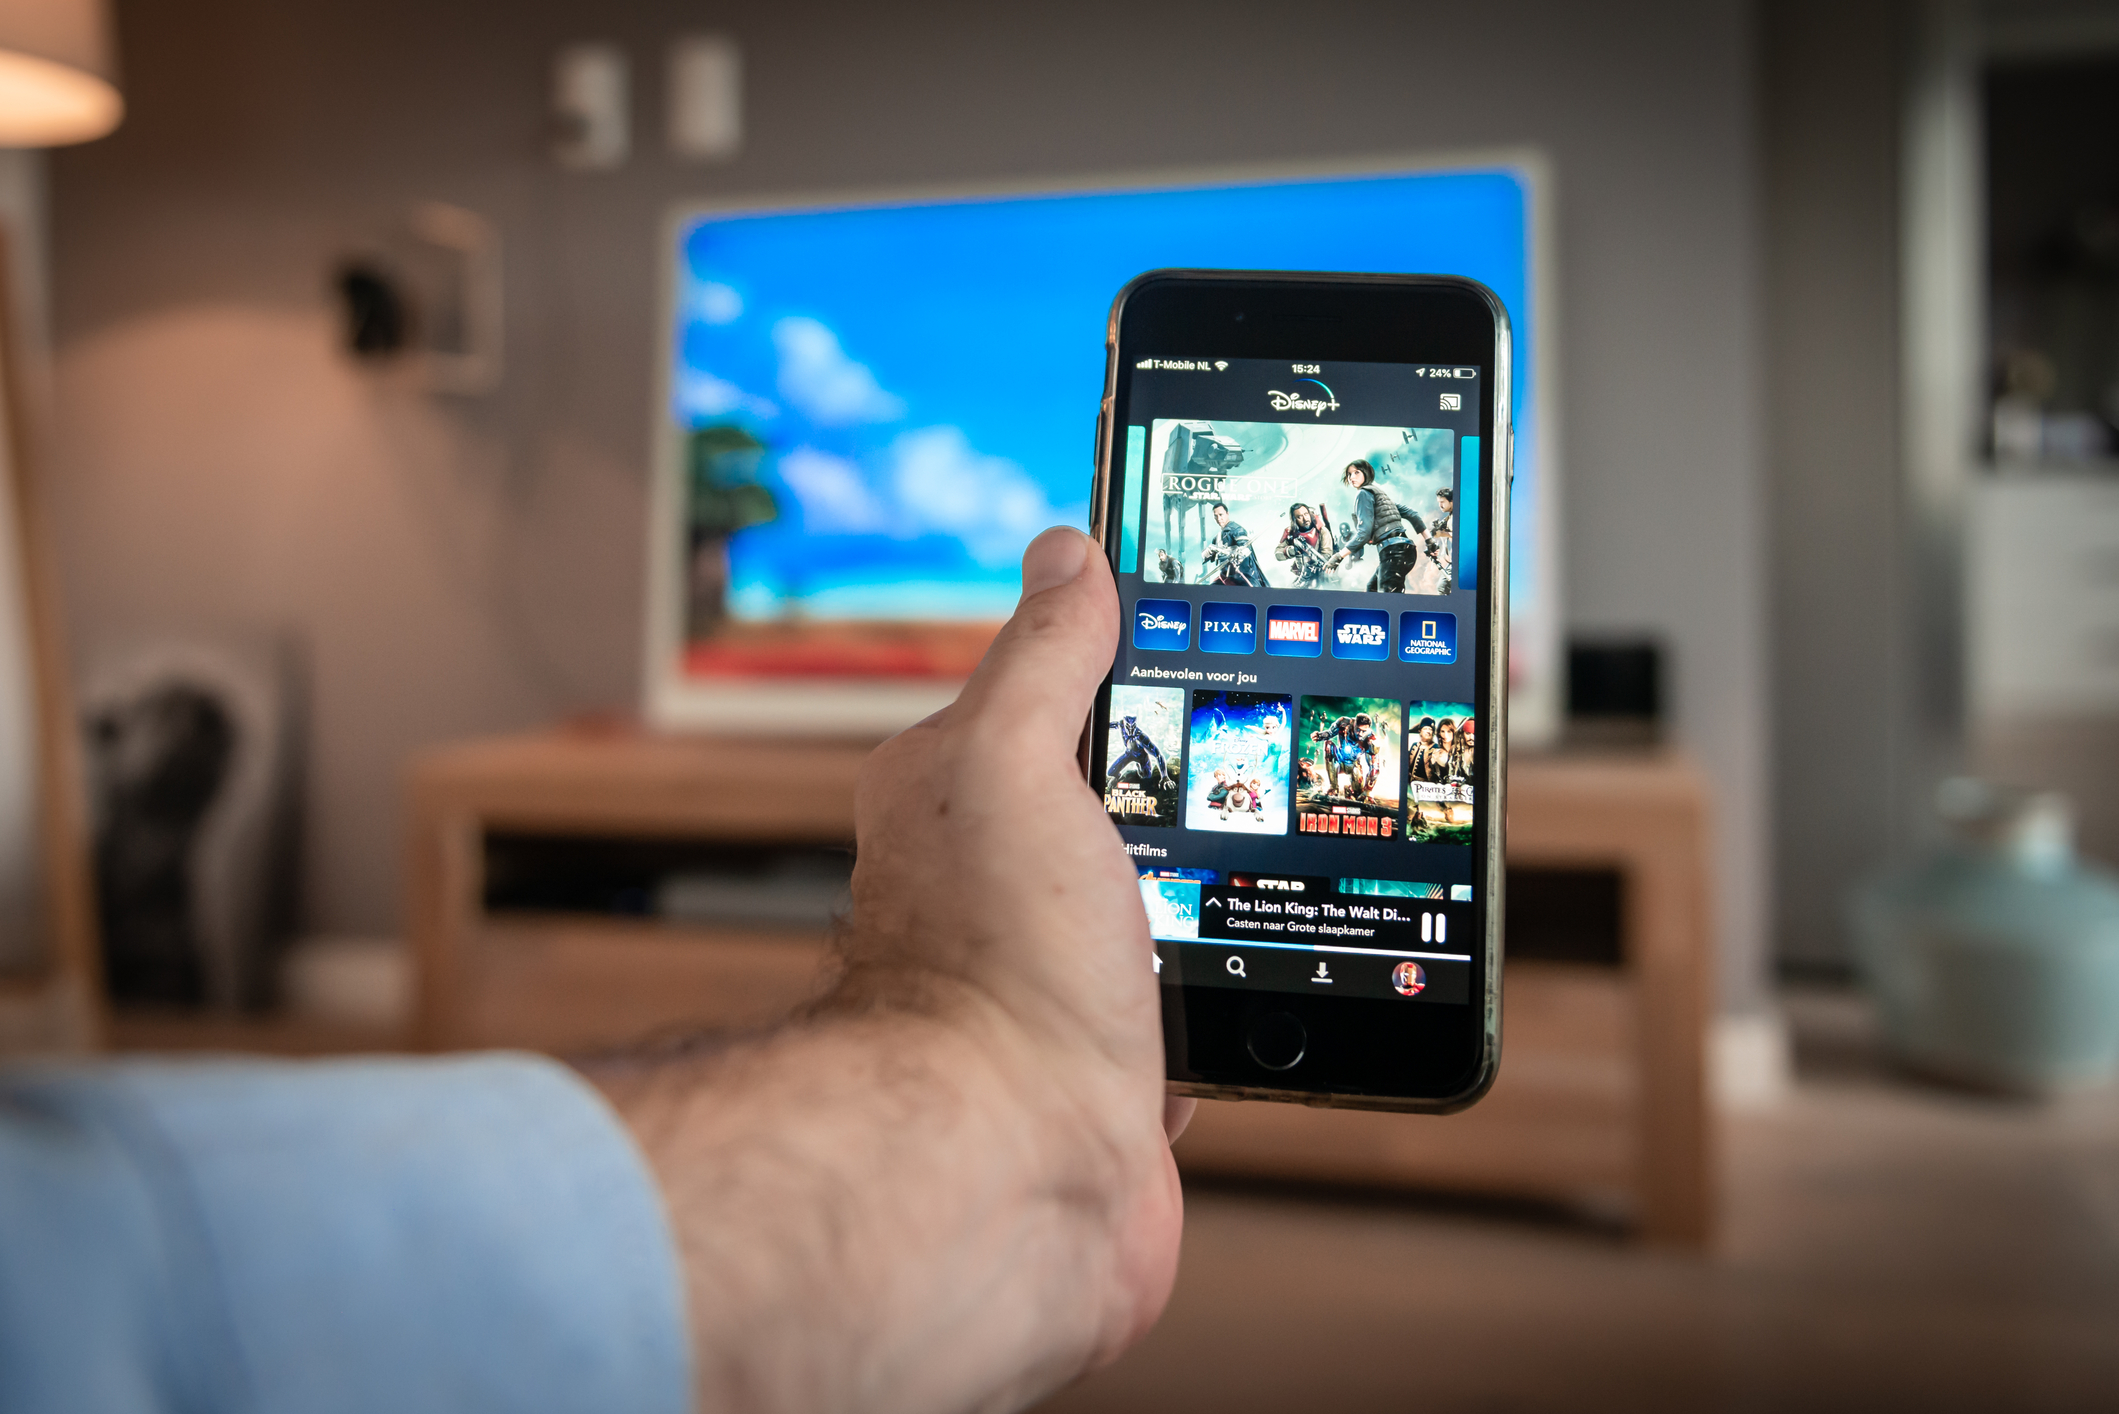 Can i stream my phone to my tv without wifi How To Quickly Connect Phone To Smart Tv Without Wifi The Conch Tech